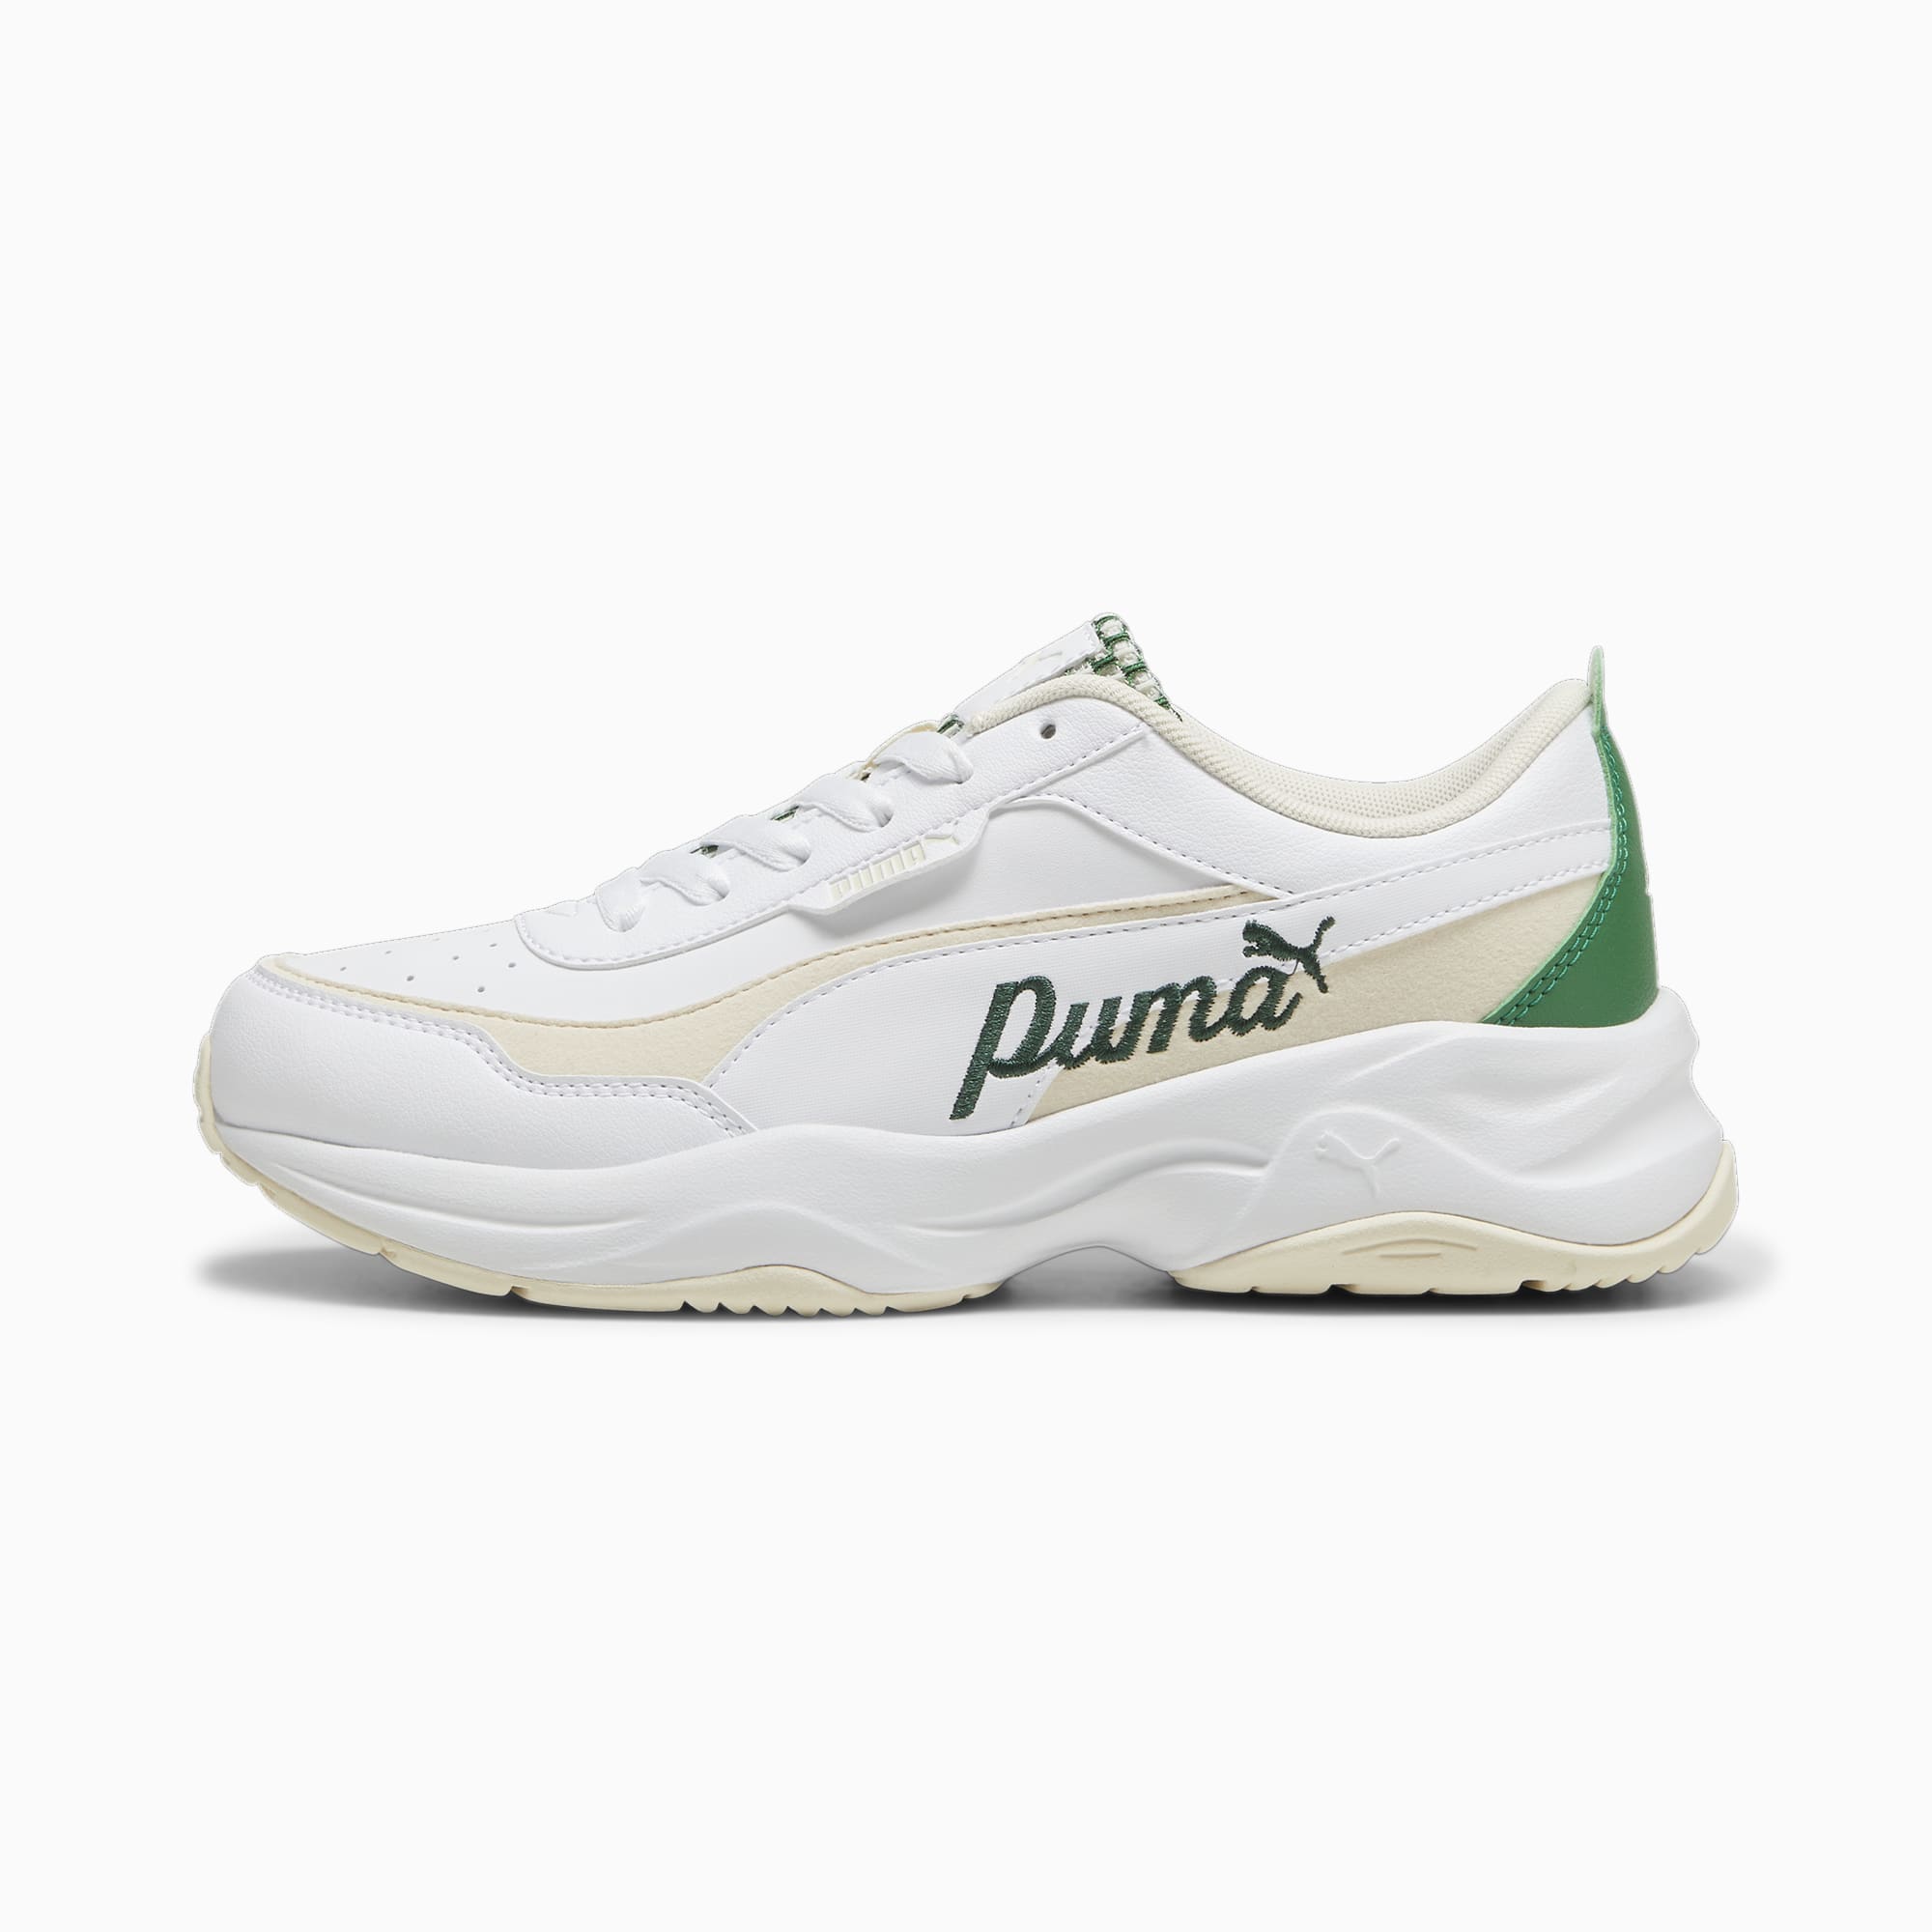 PUMA Cilia Mode Blossom Sneakers Voor Dames, Wit/Groen/Rood